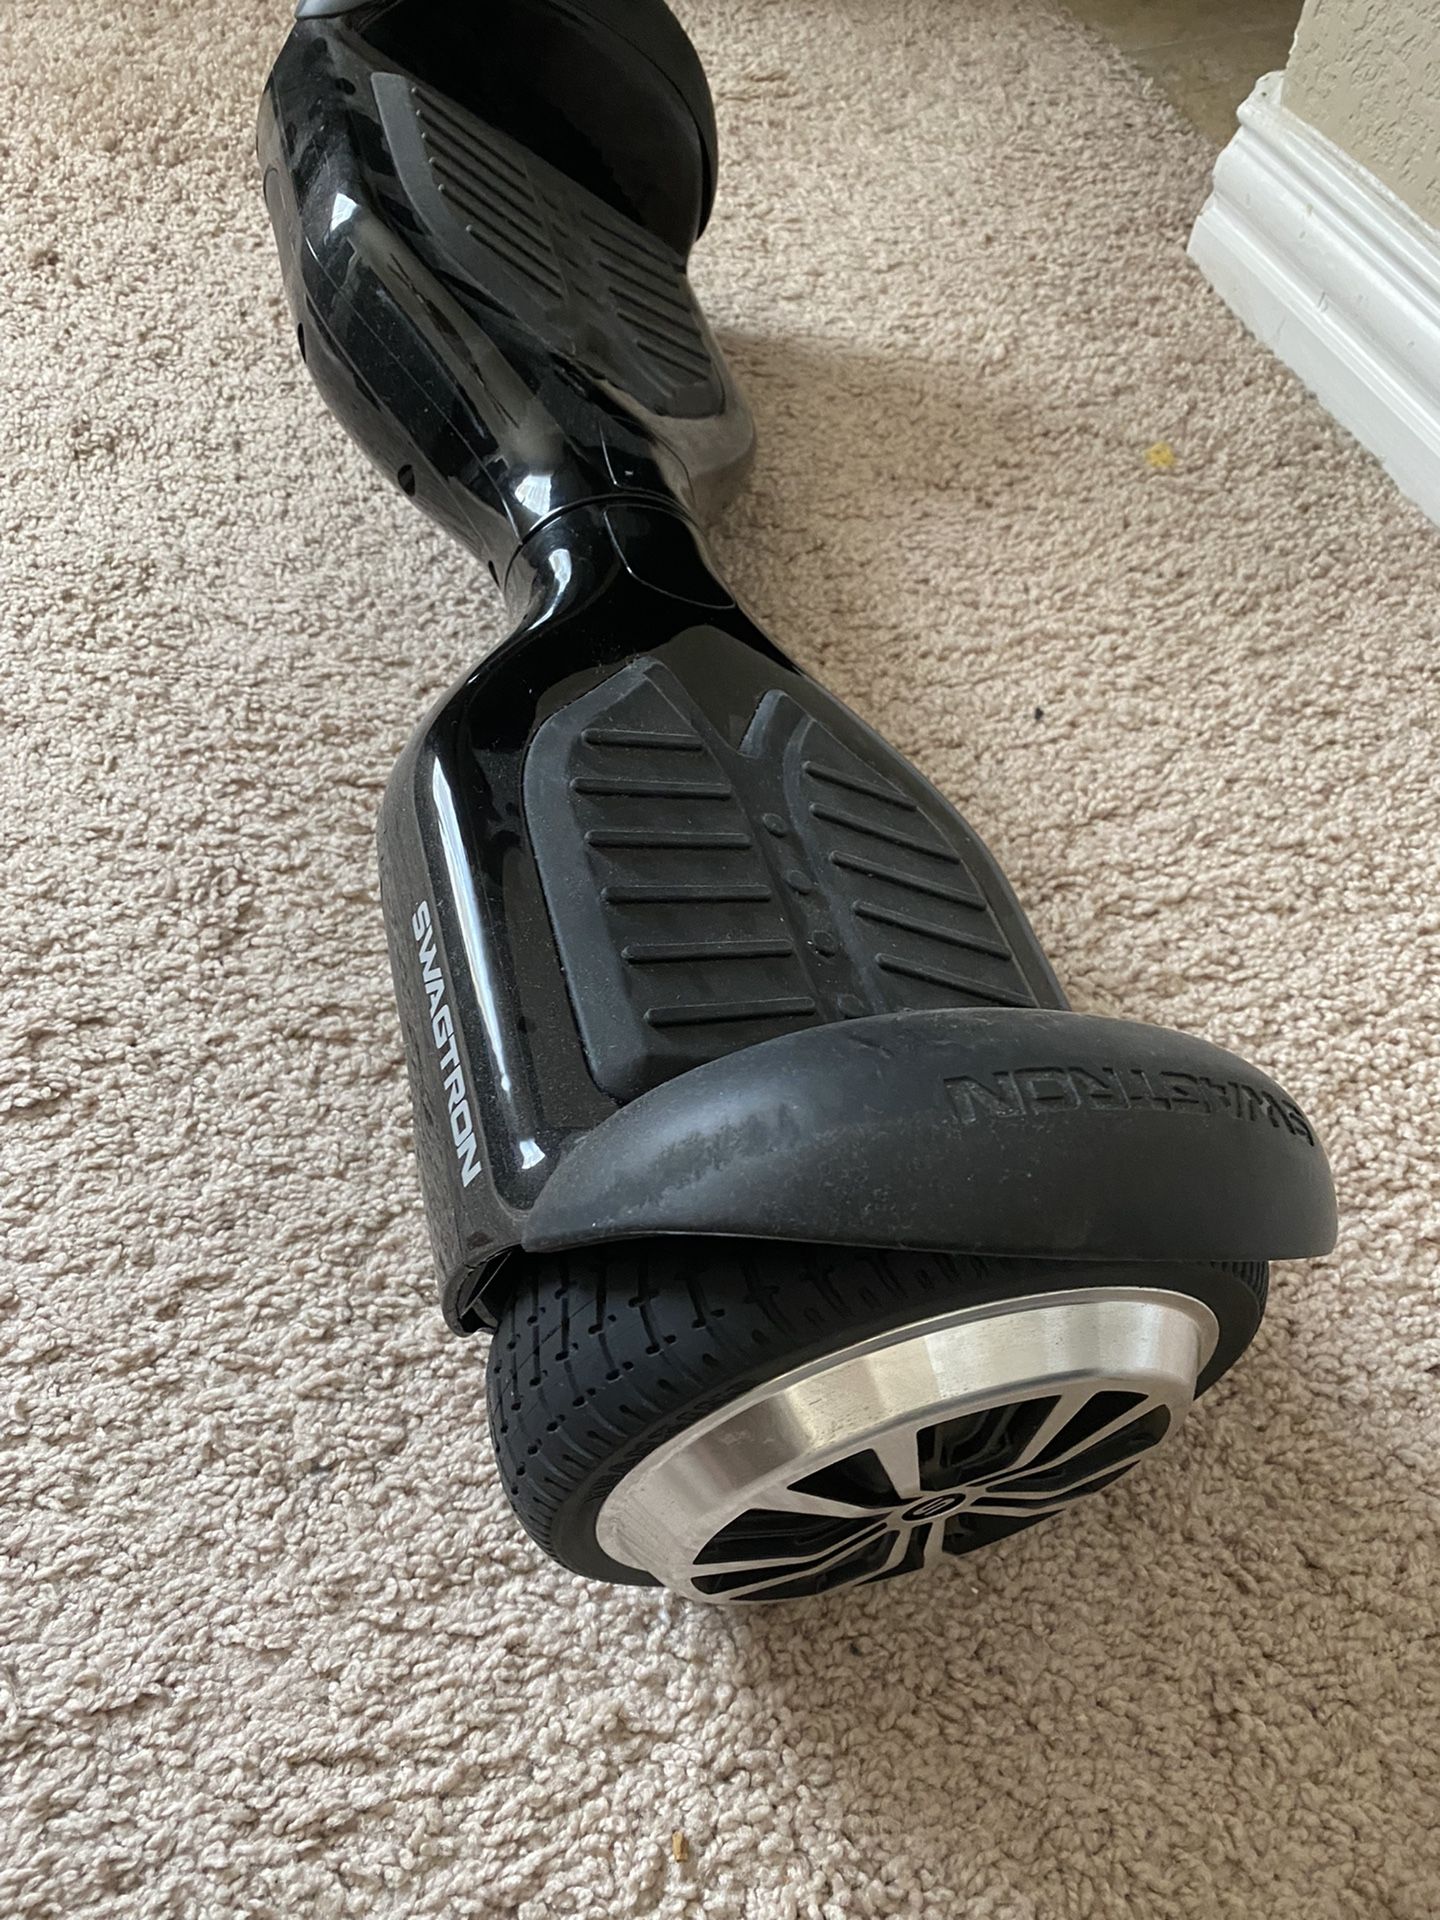 SWAGTRON T1 HOVERBOARD